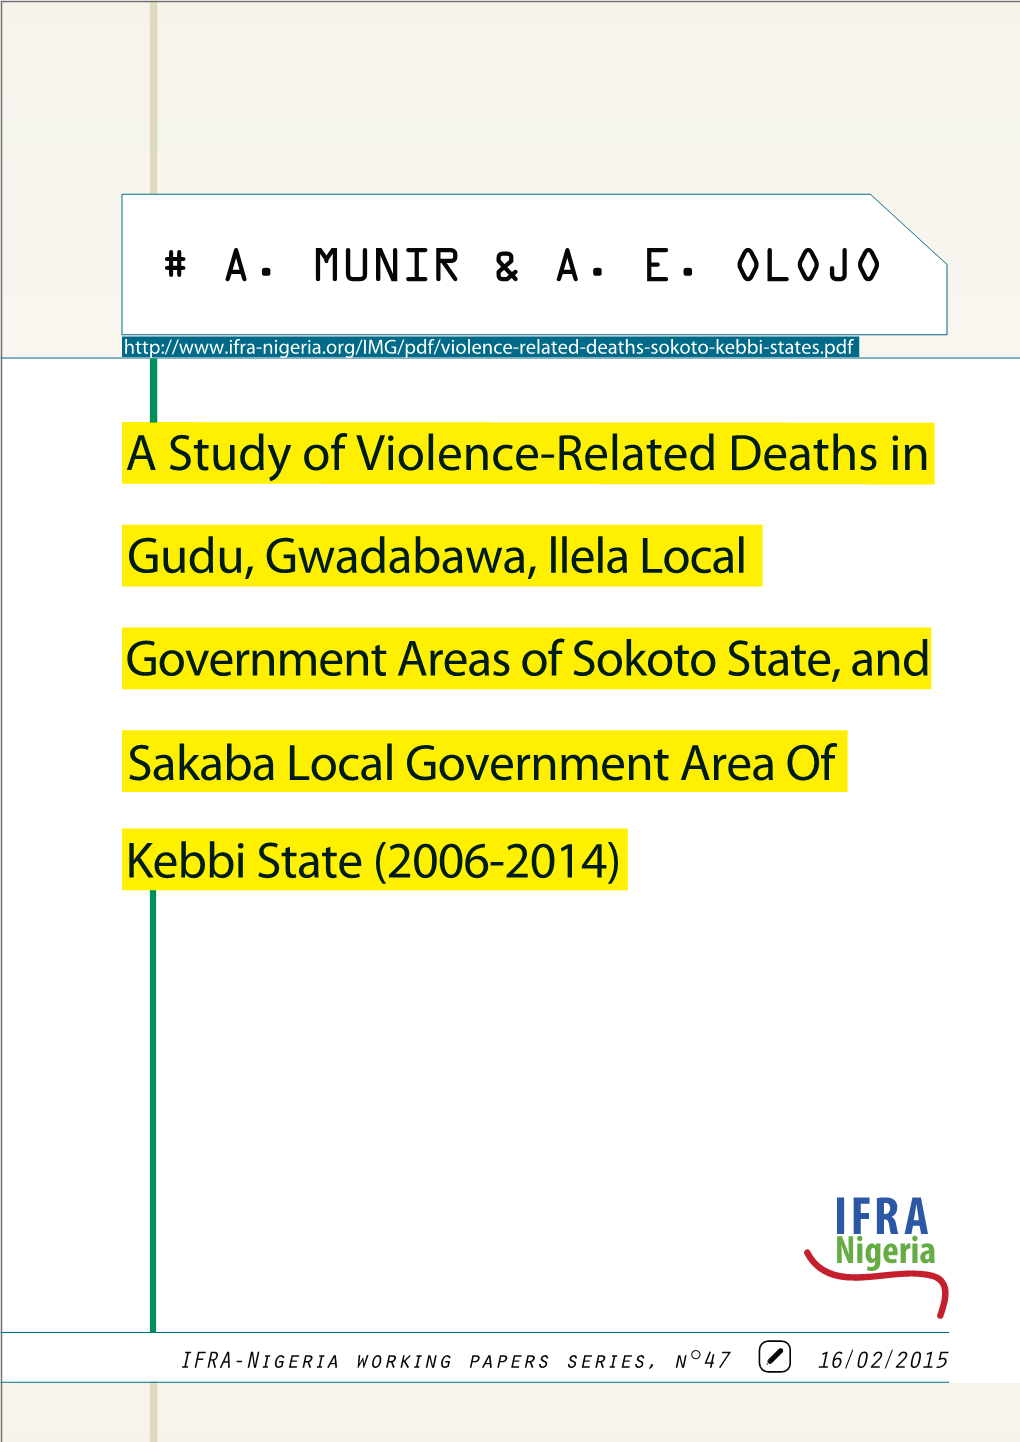 A Study of Violence-Related Deaths in Gudu, Gwadabawa, Llela Local Government Areas of Sokoto State, And